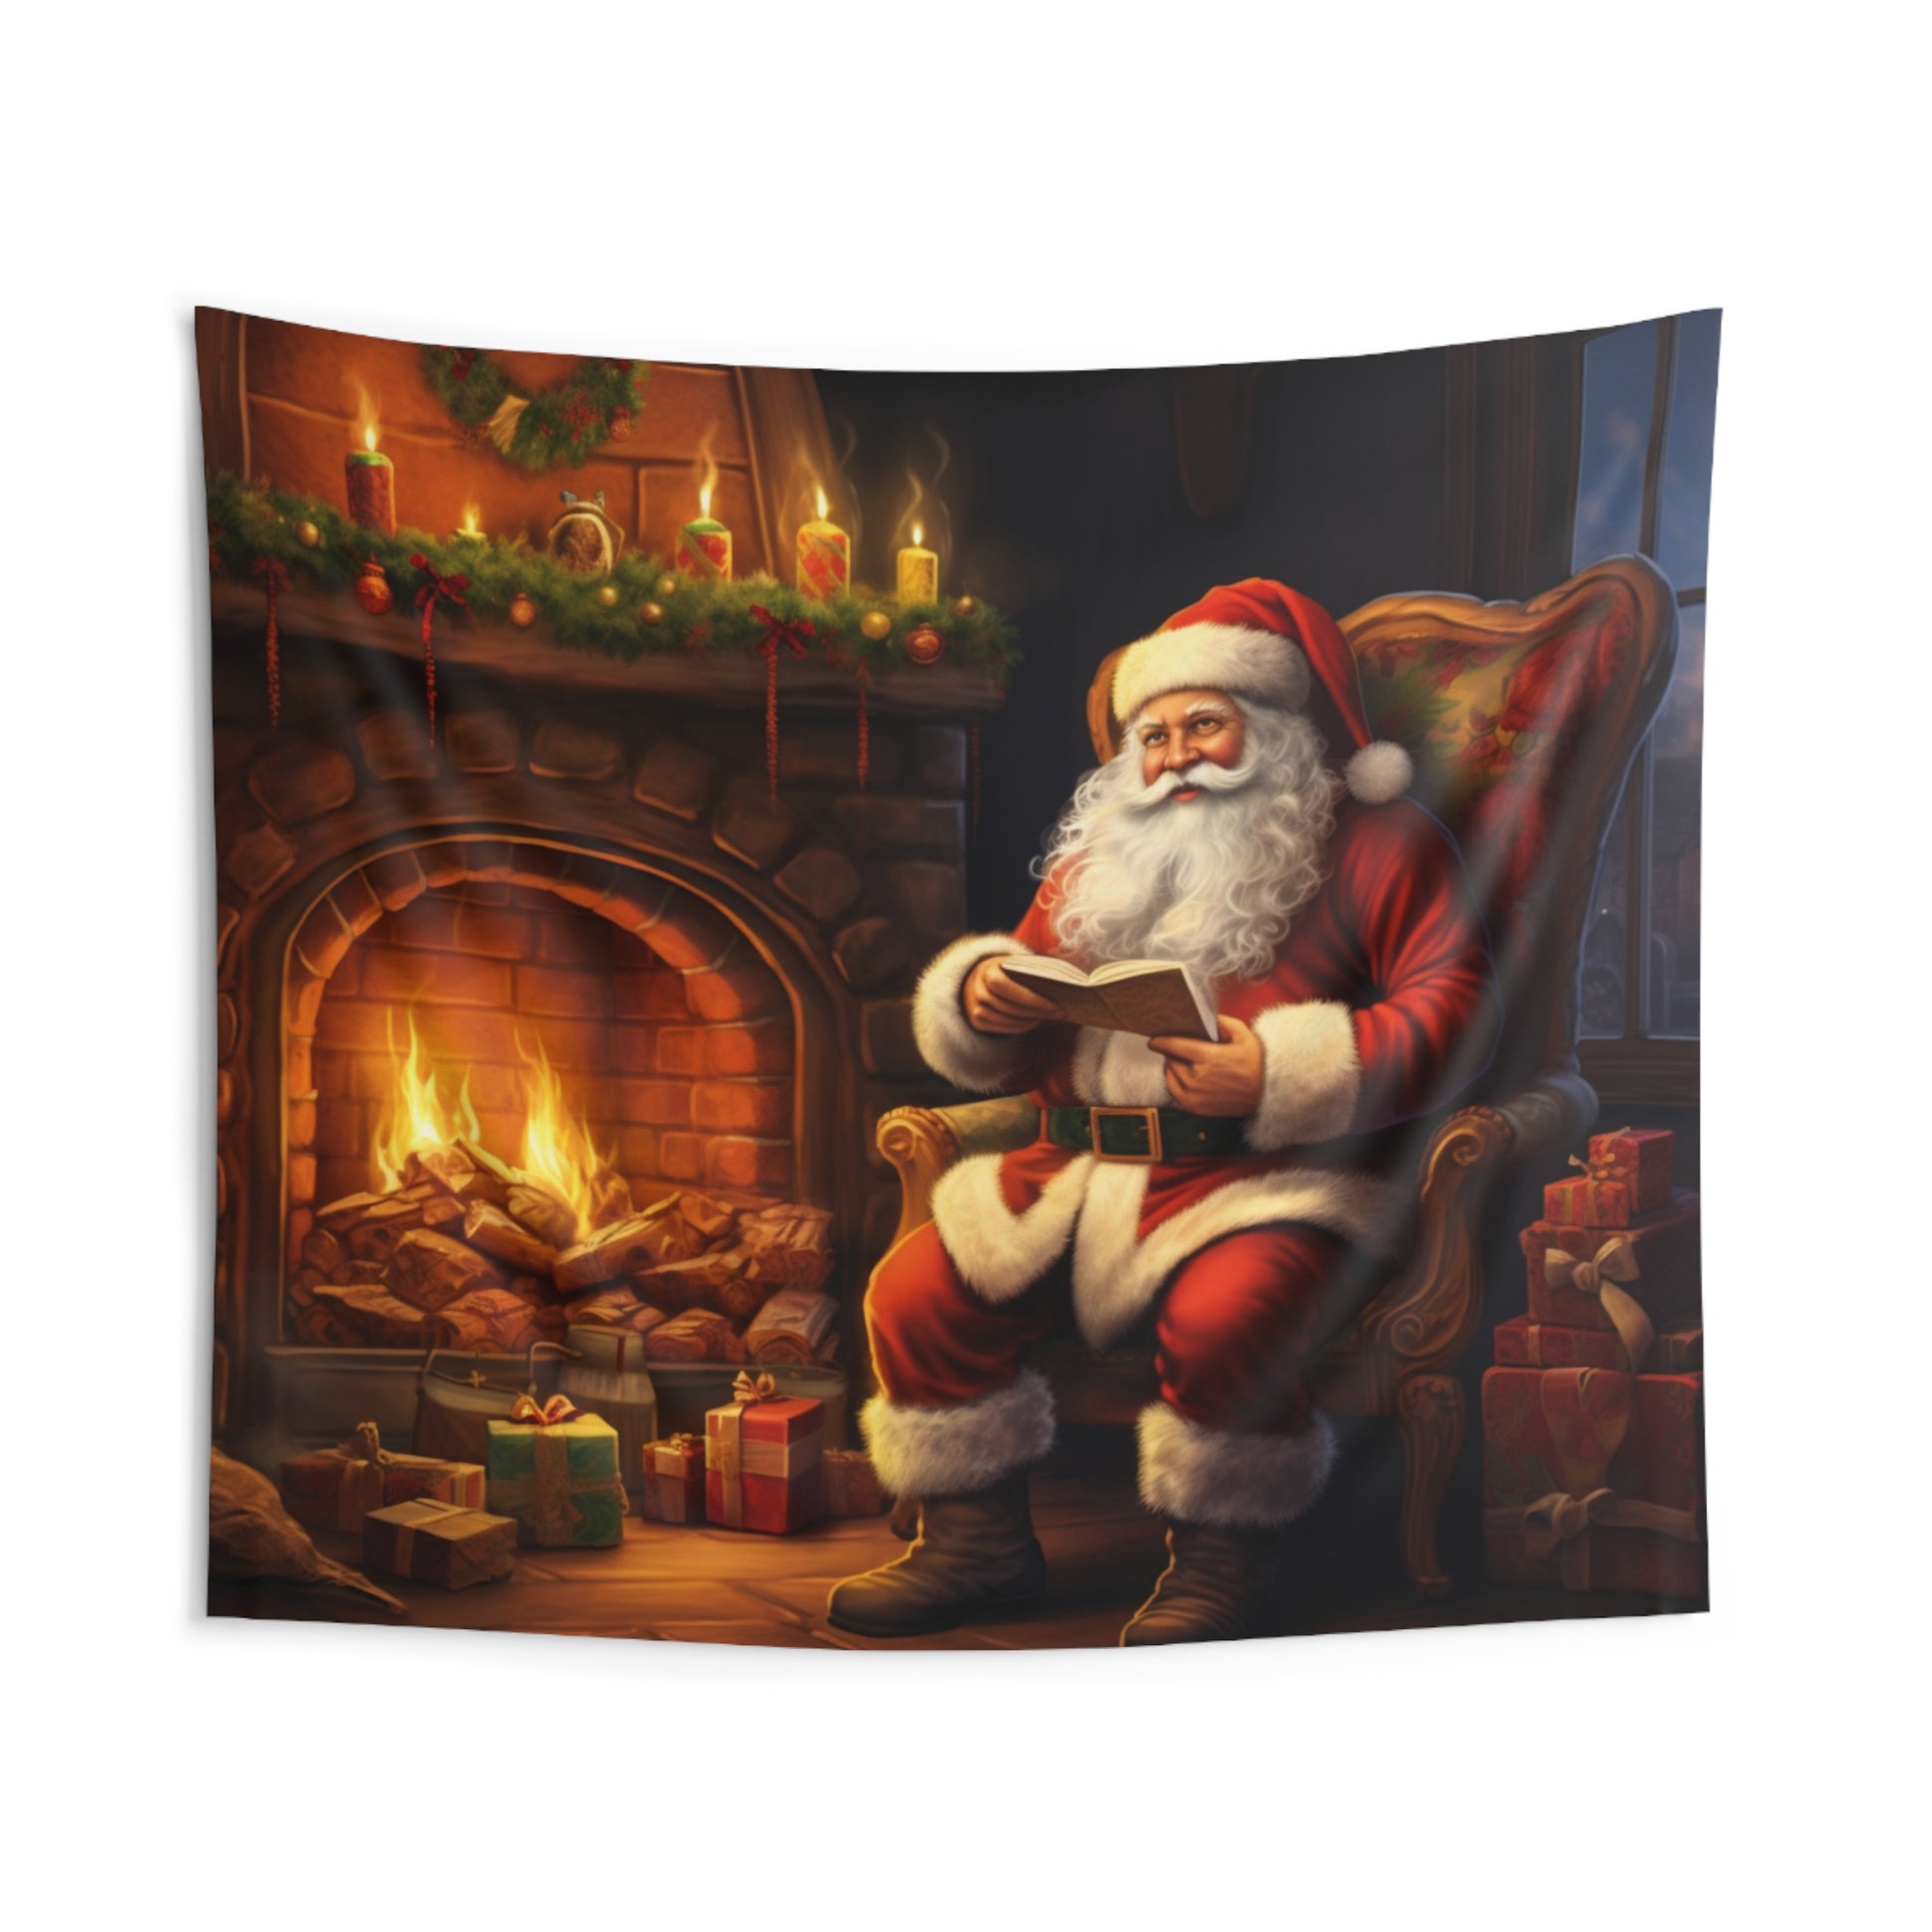 Santa Claus Christmas Tapestry, Fireplace Presents Wall Art Hanging Cool Unique Landscape Aesthetic Large Small Decor Bedroom Dorm Room Starcove Fashion